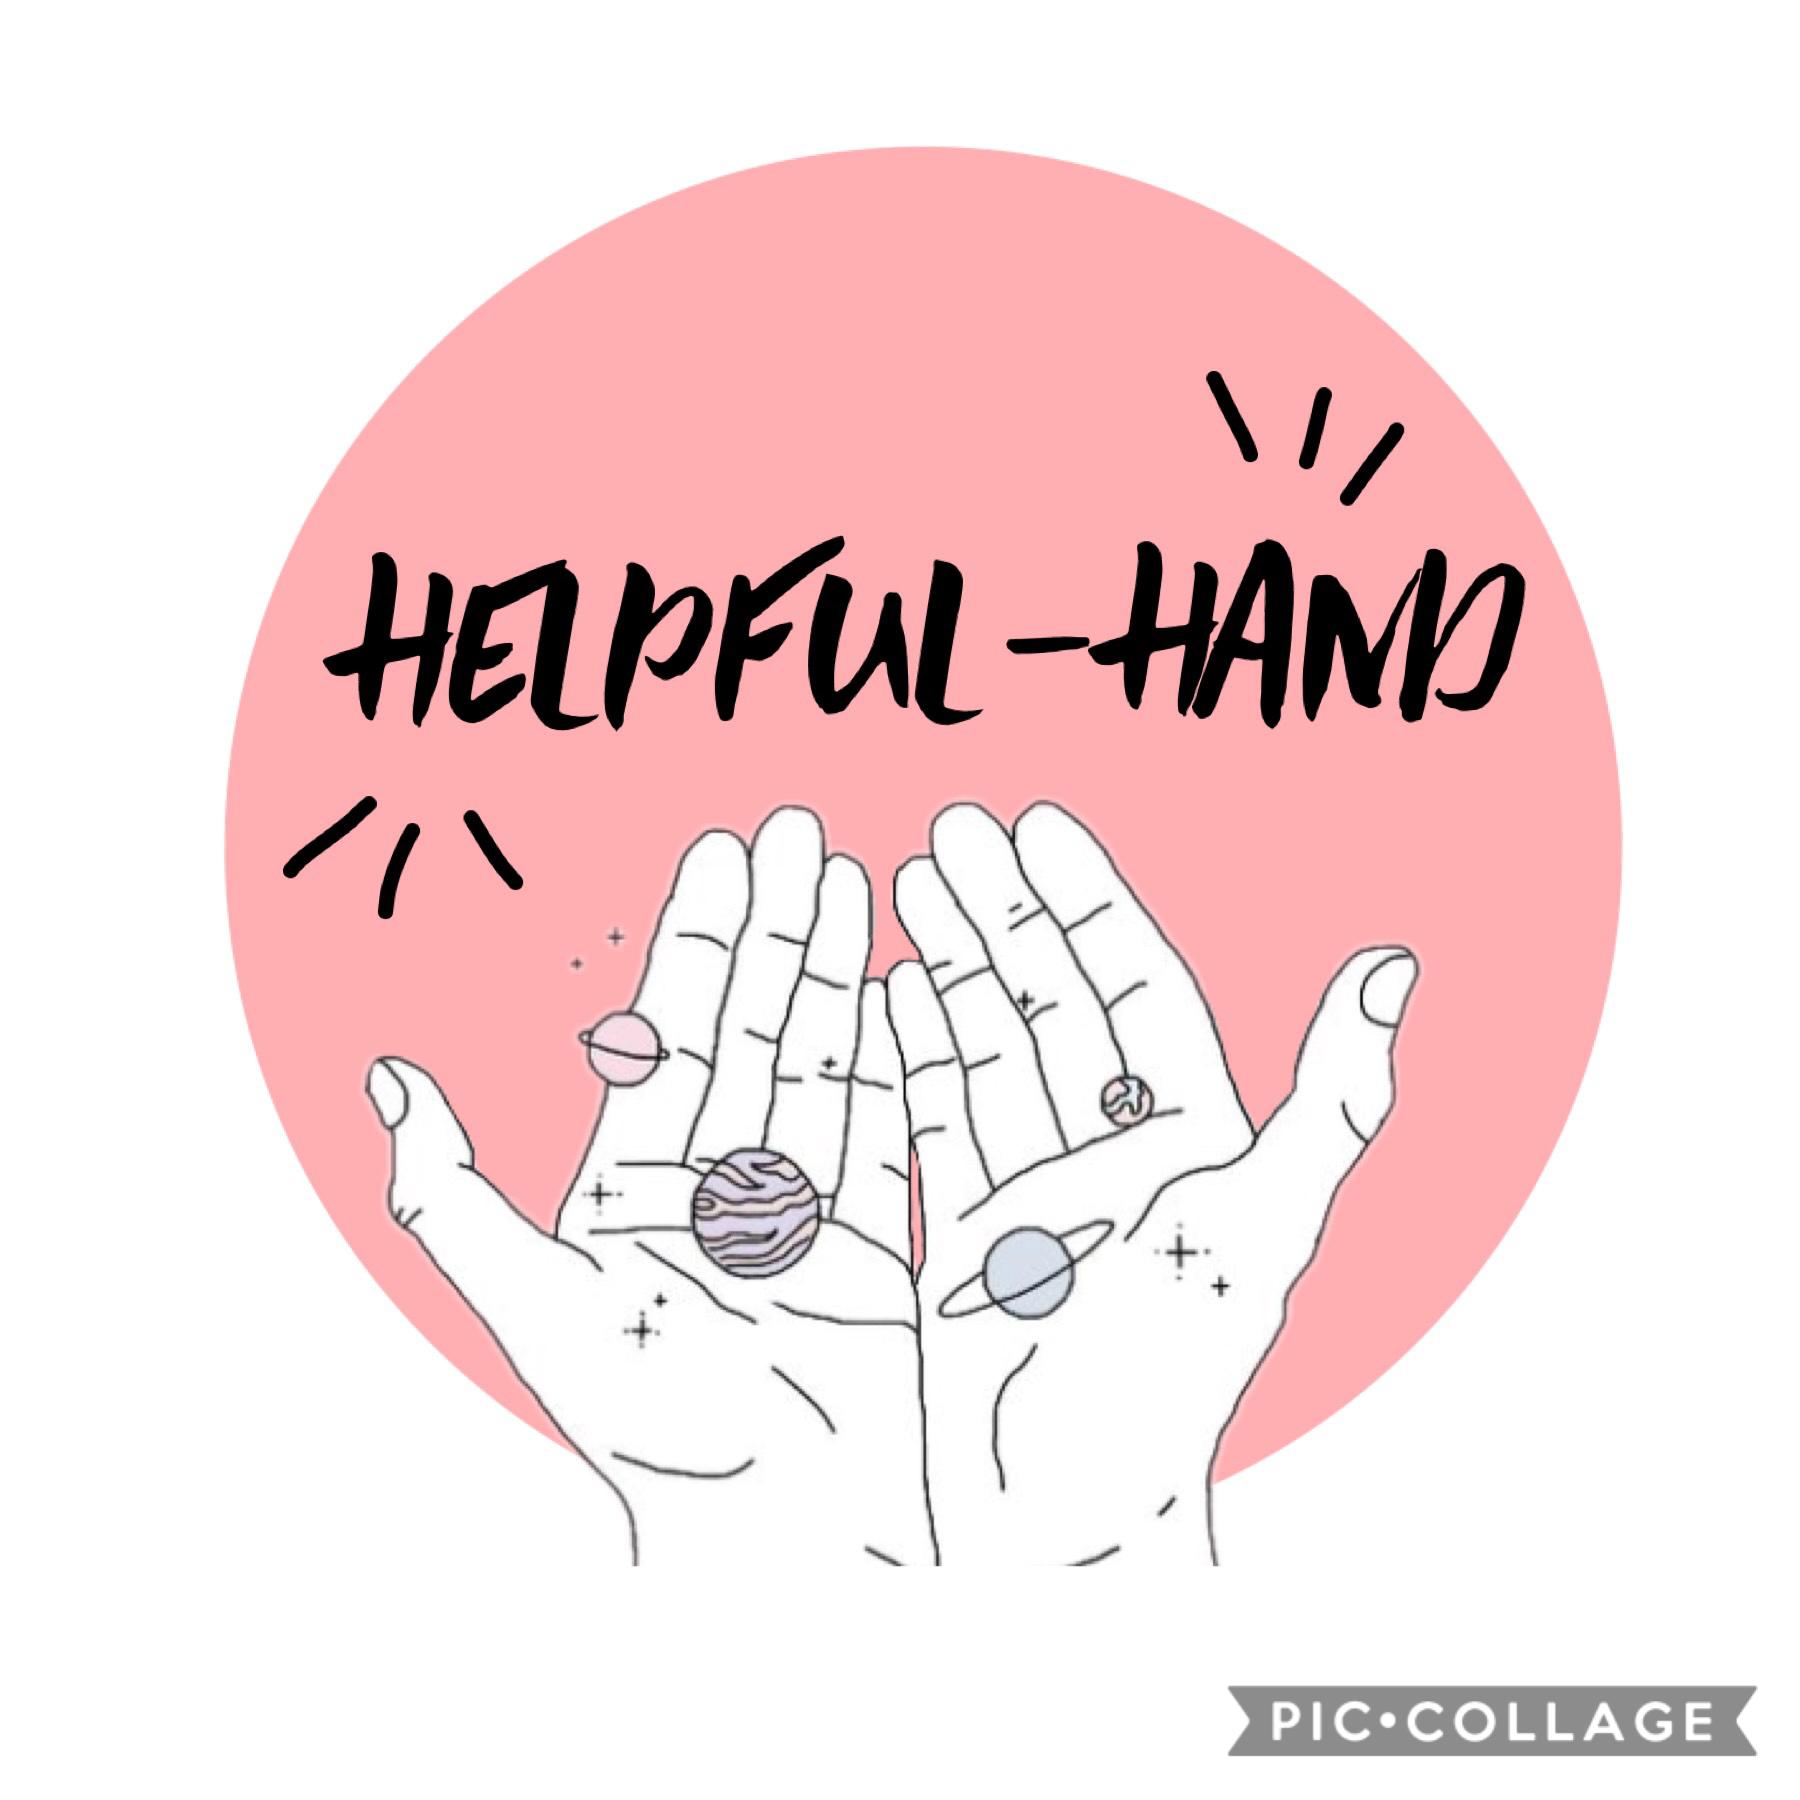 Welcome to my account! This is @helpful-hand here ready to help! Intro collage coming shortly! And yasss I do have main which I will not be revealing at least not yet 😂😊